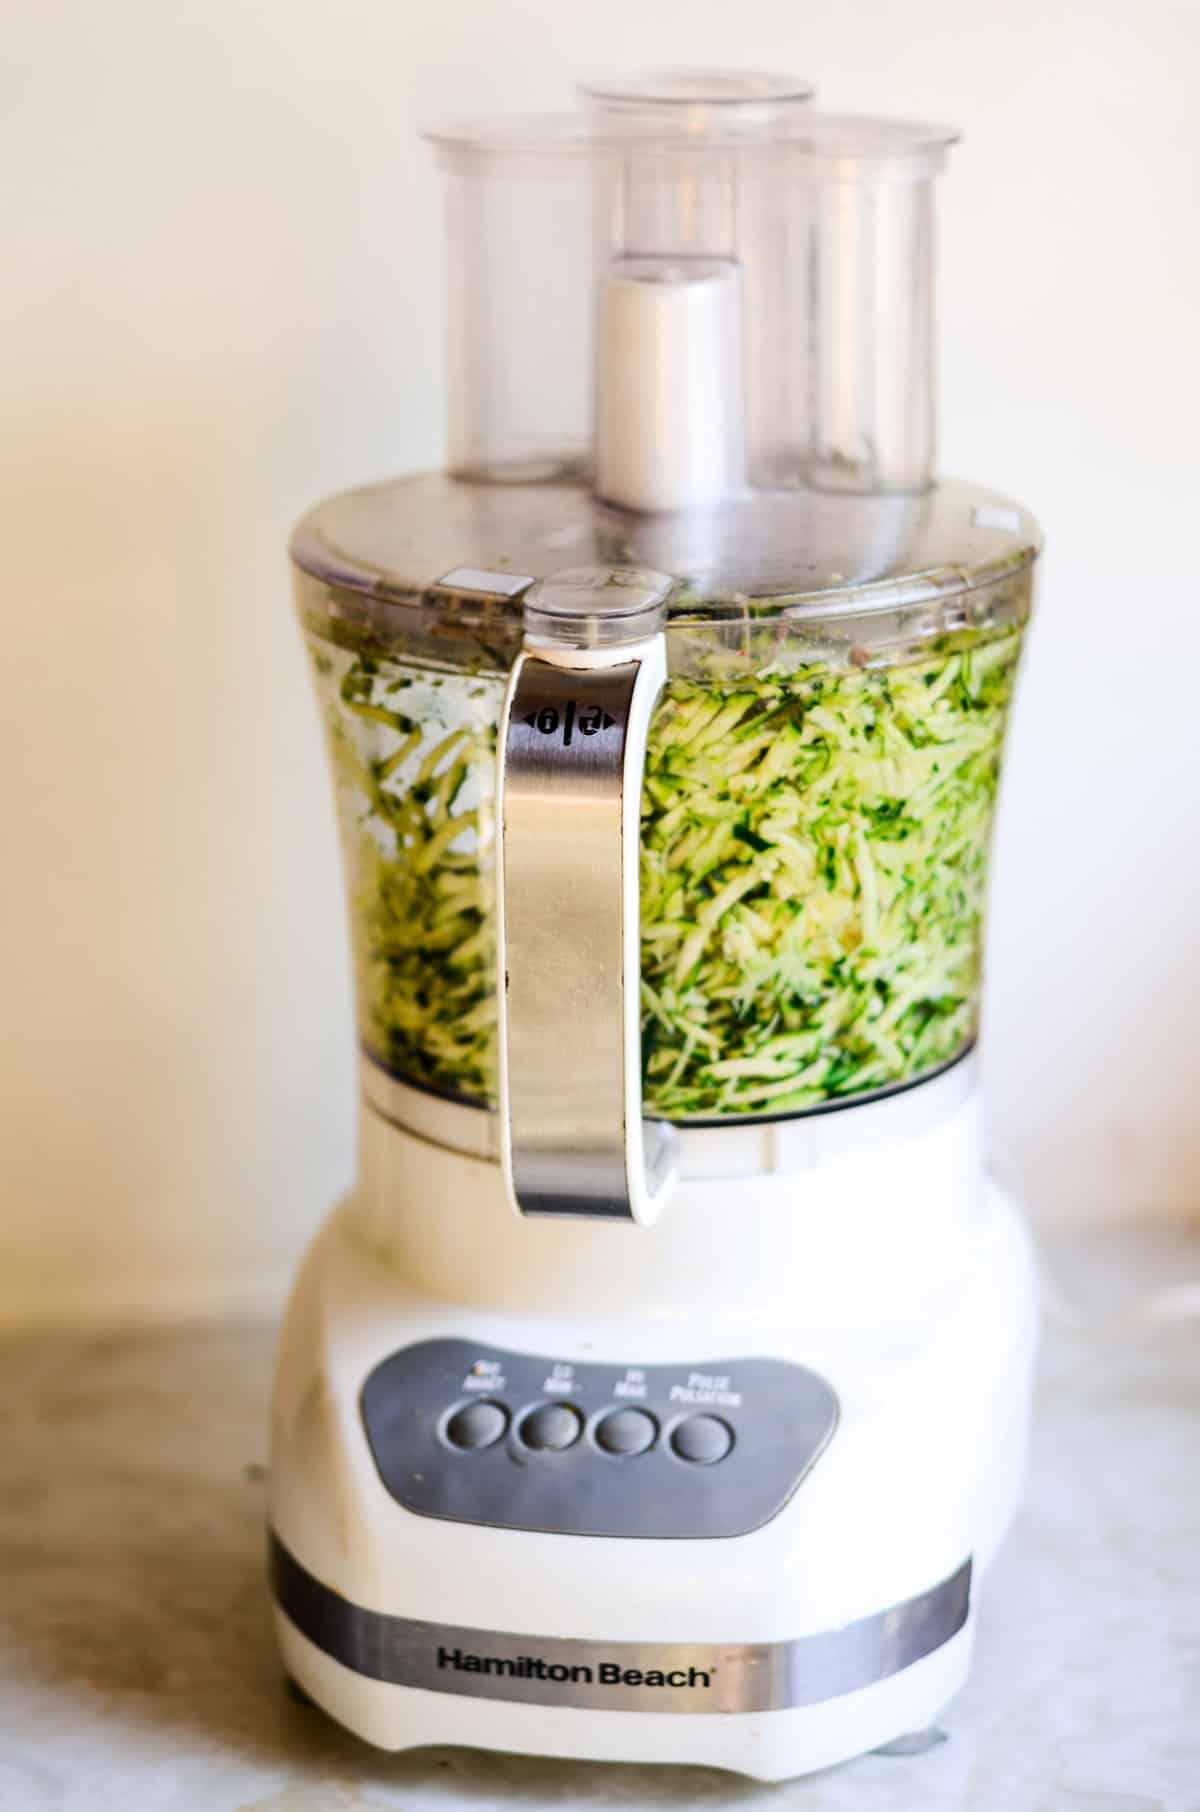 A white food processor with shredded zucchini inside.